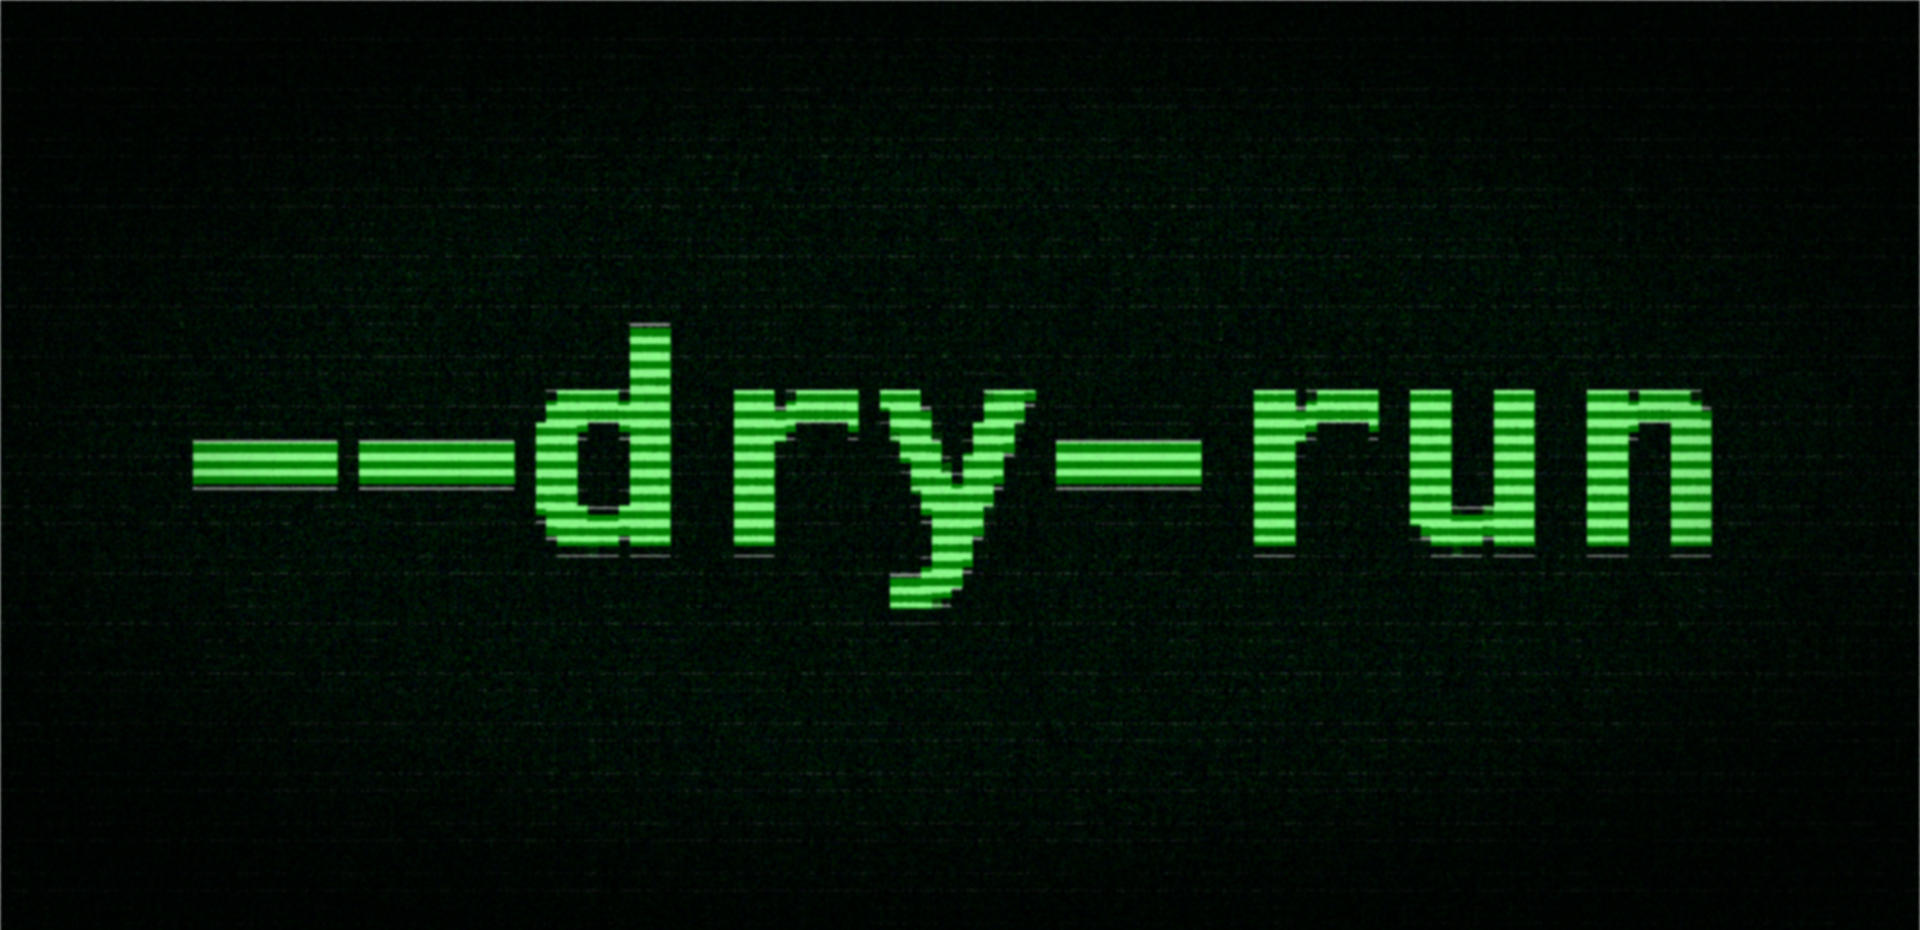 text "--dry-run" in a monospace font and the look of an old CRT monitor terminal